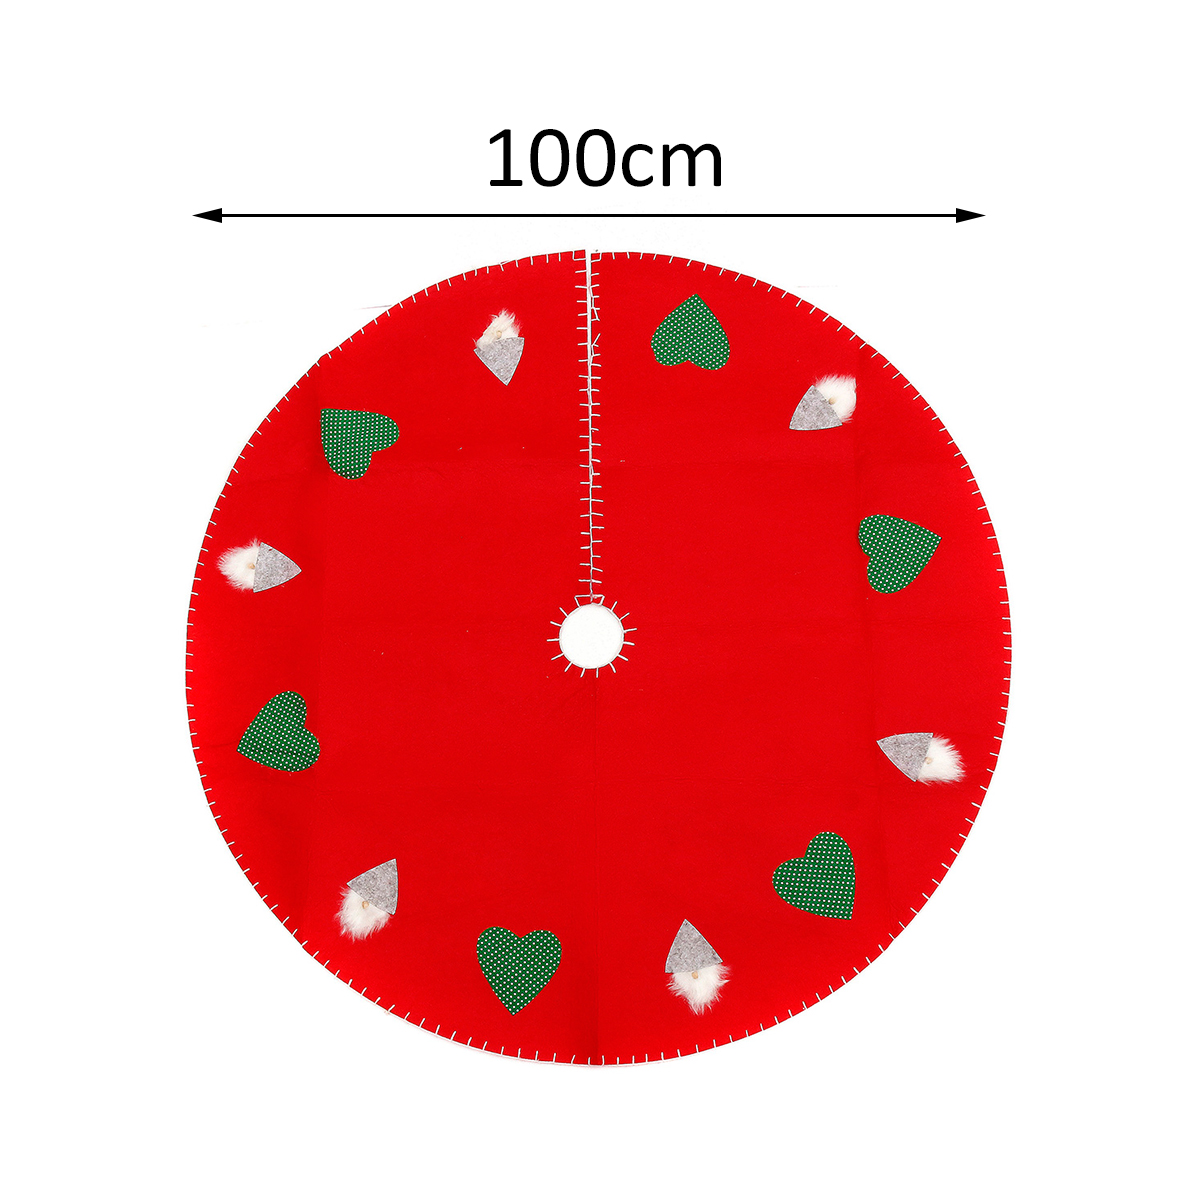 100cm-Red-Christmas-Tree-Skirt-Carpet-Party-Gift-Decor-Pad-Ornaments-Round-Mat-1376090-12